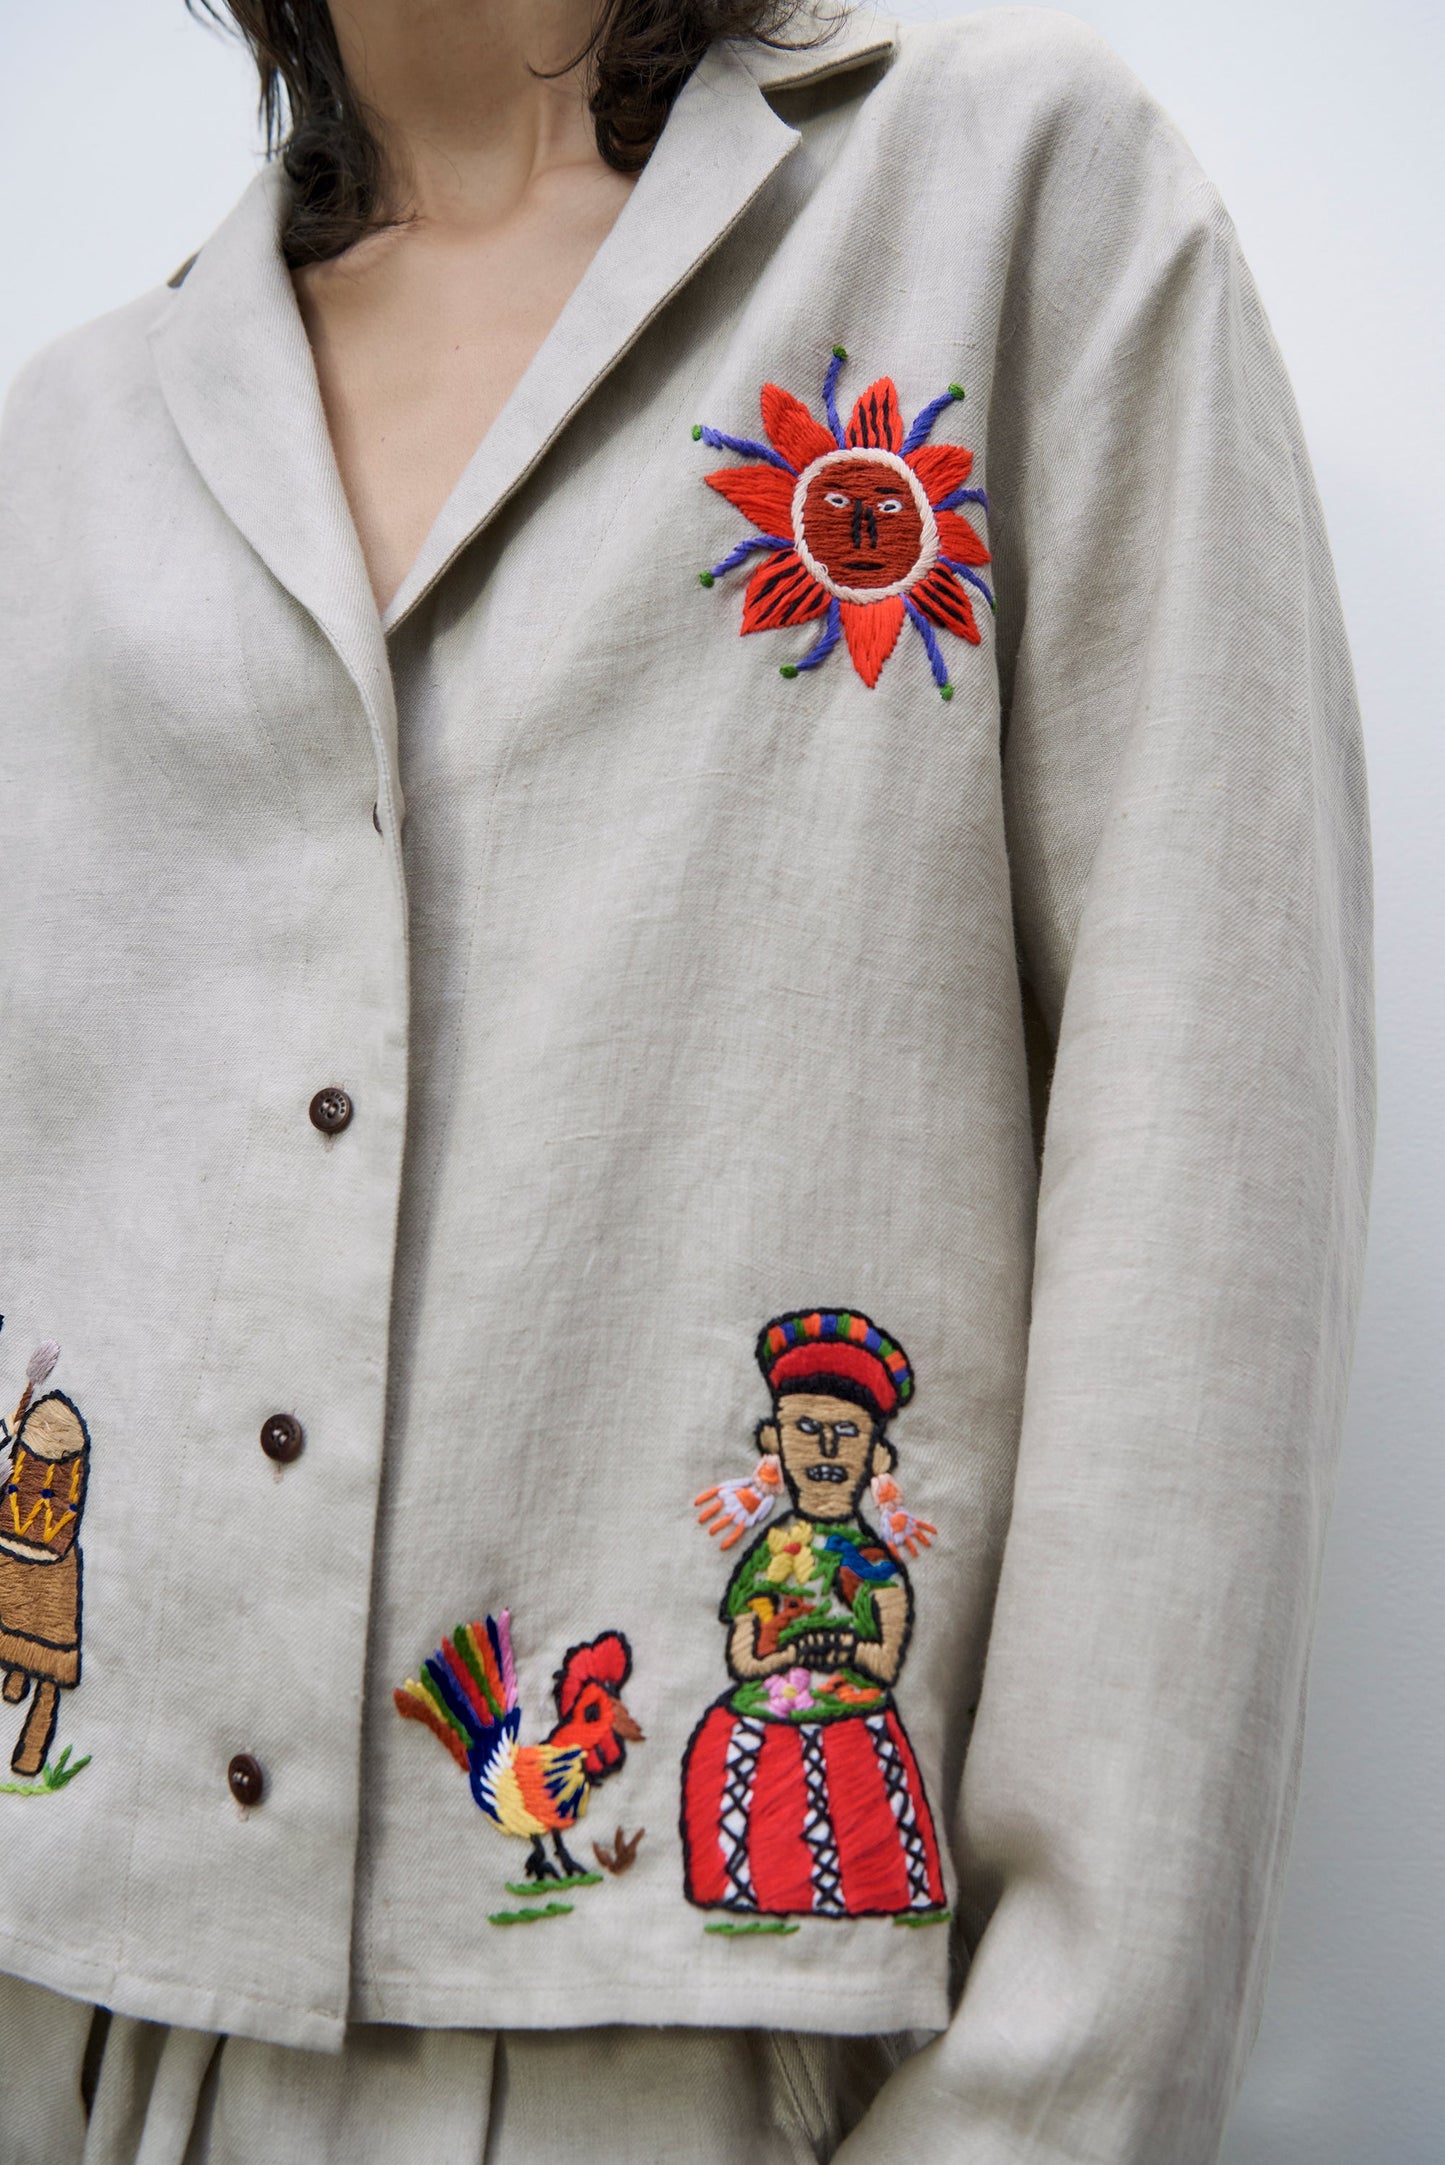 raíces hand-embroidered shirt